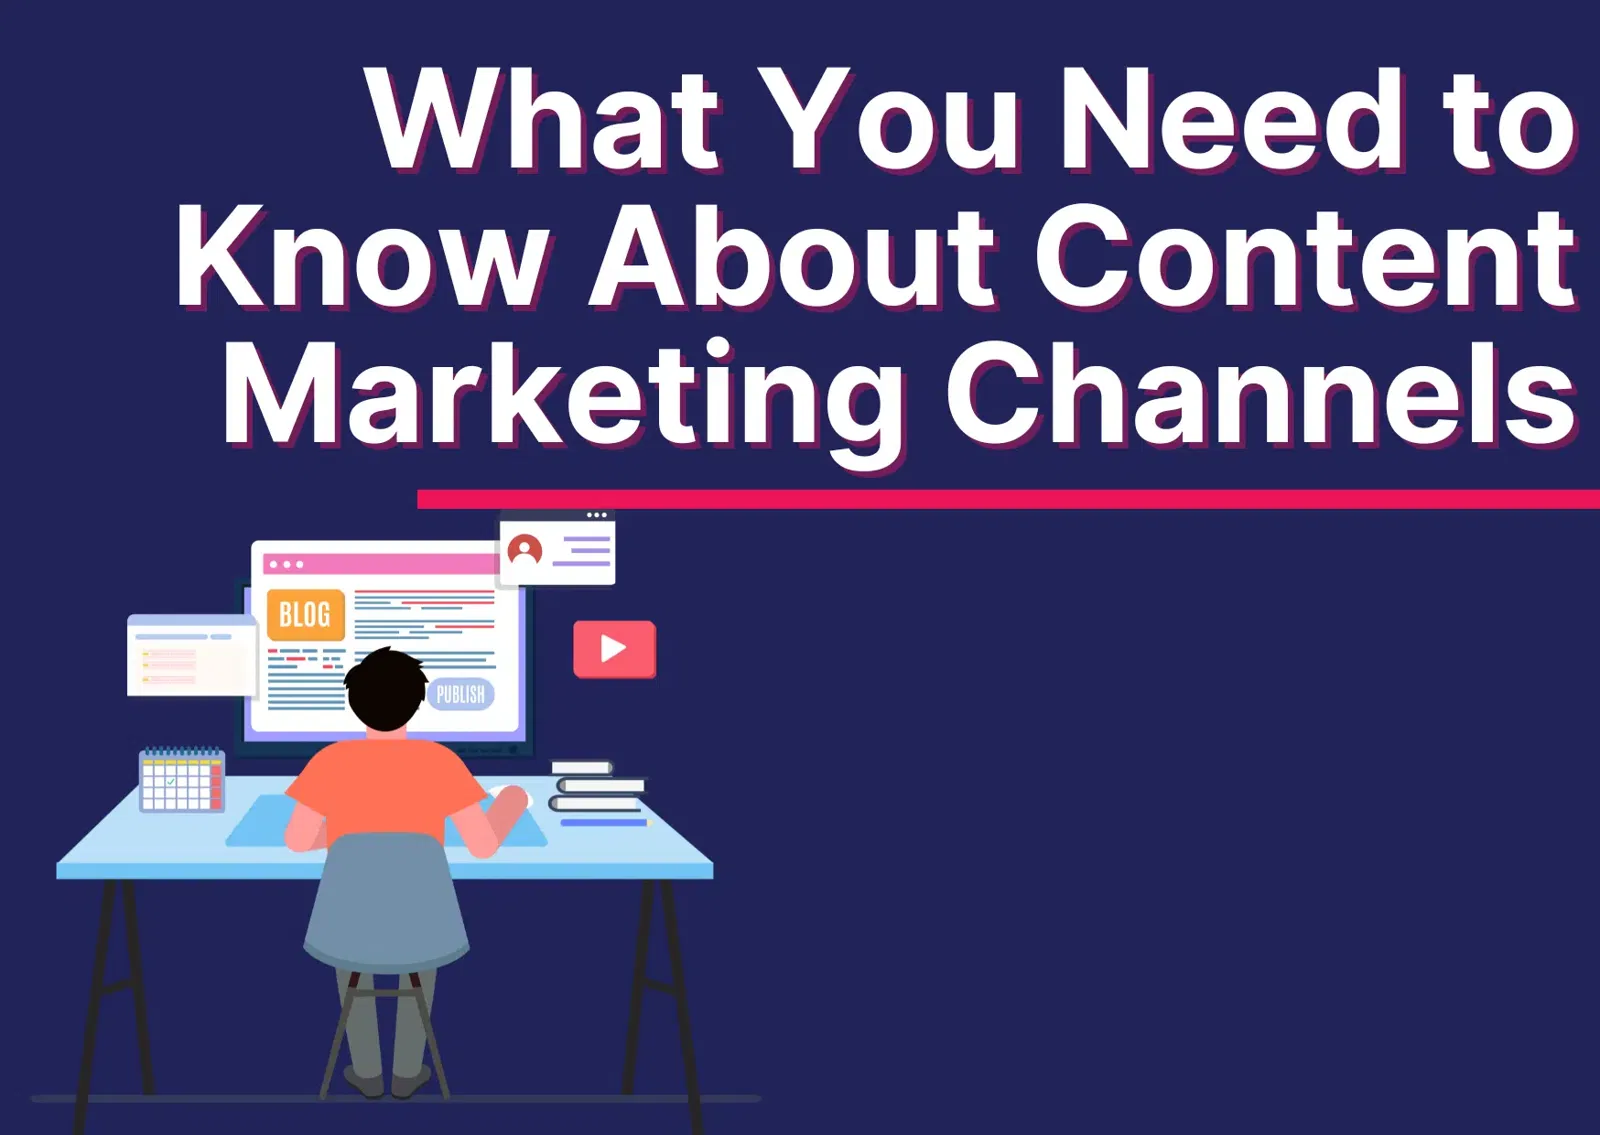 What You Need to Know About Content Marketing Channels